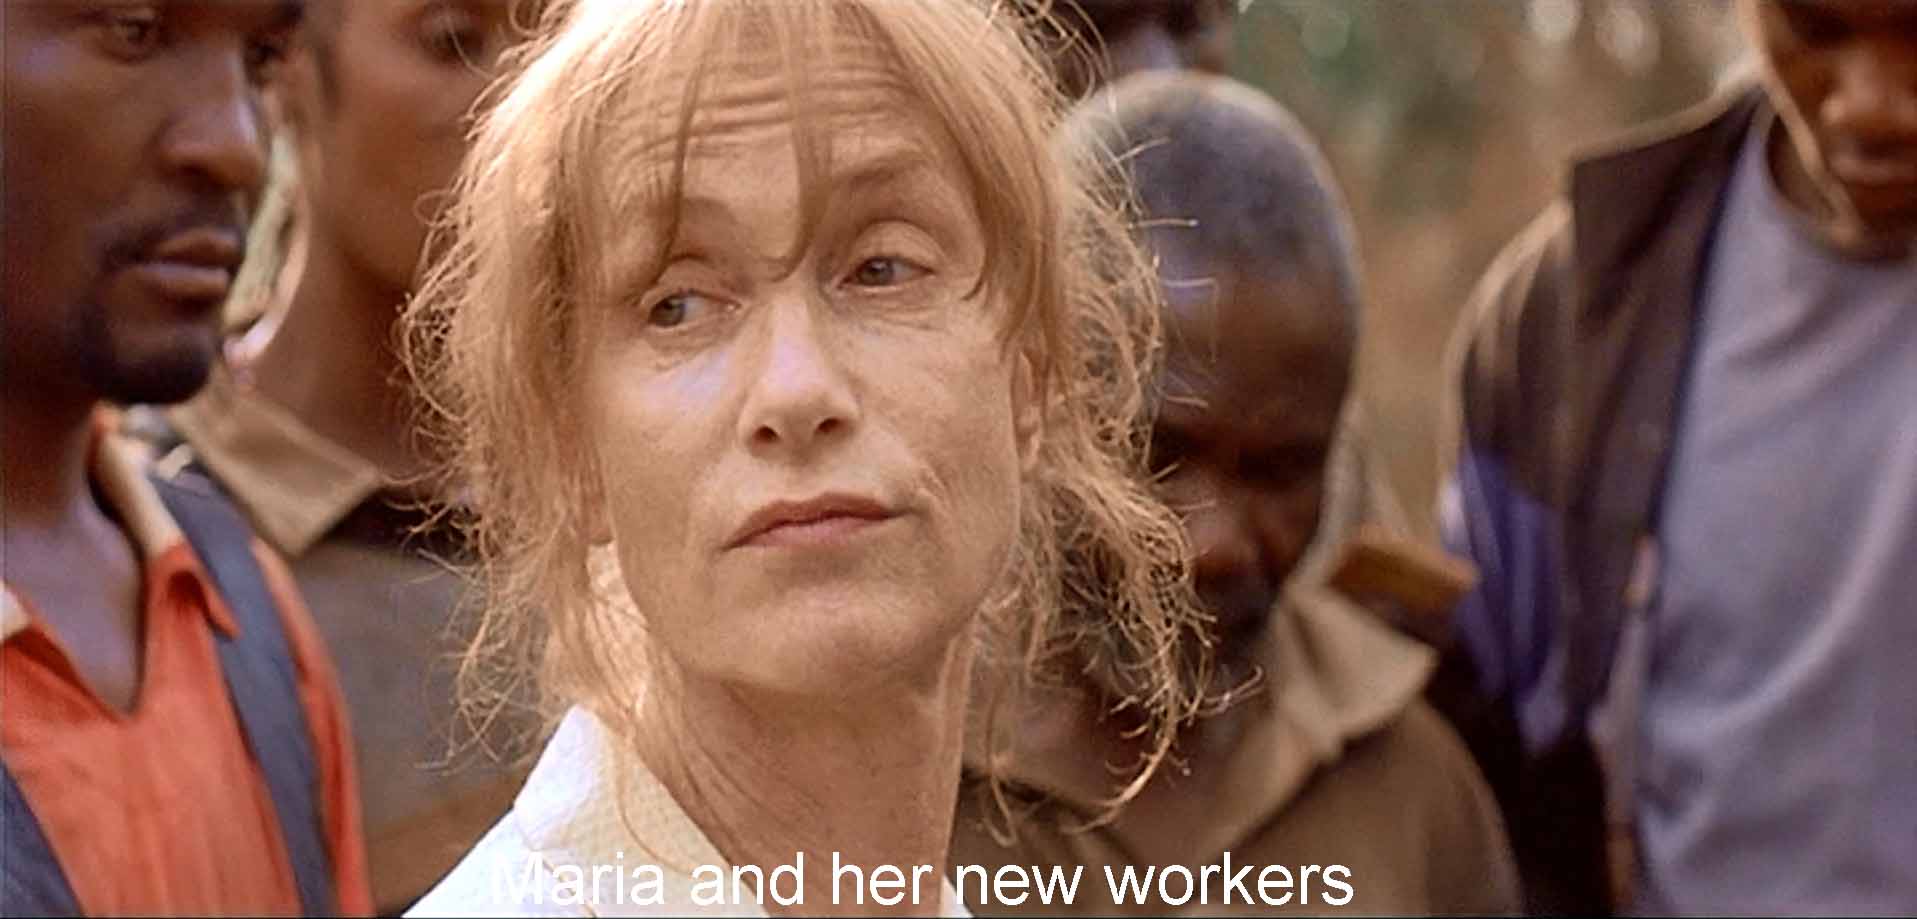 Maria and her new workers